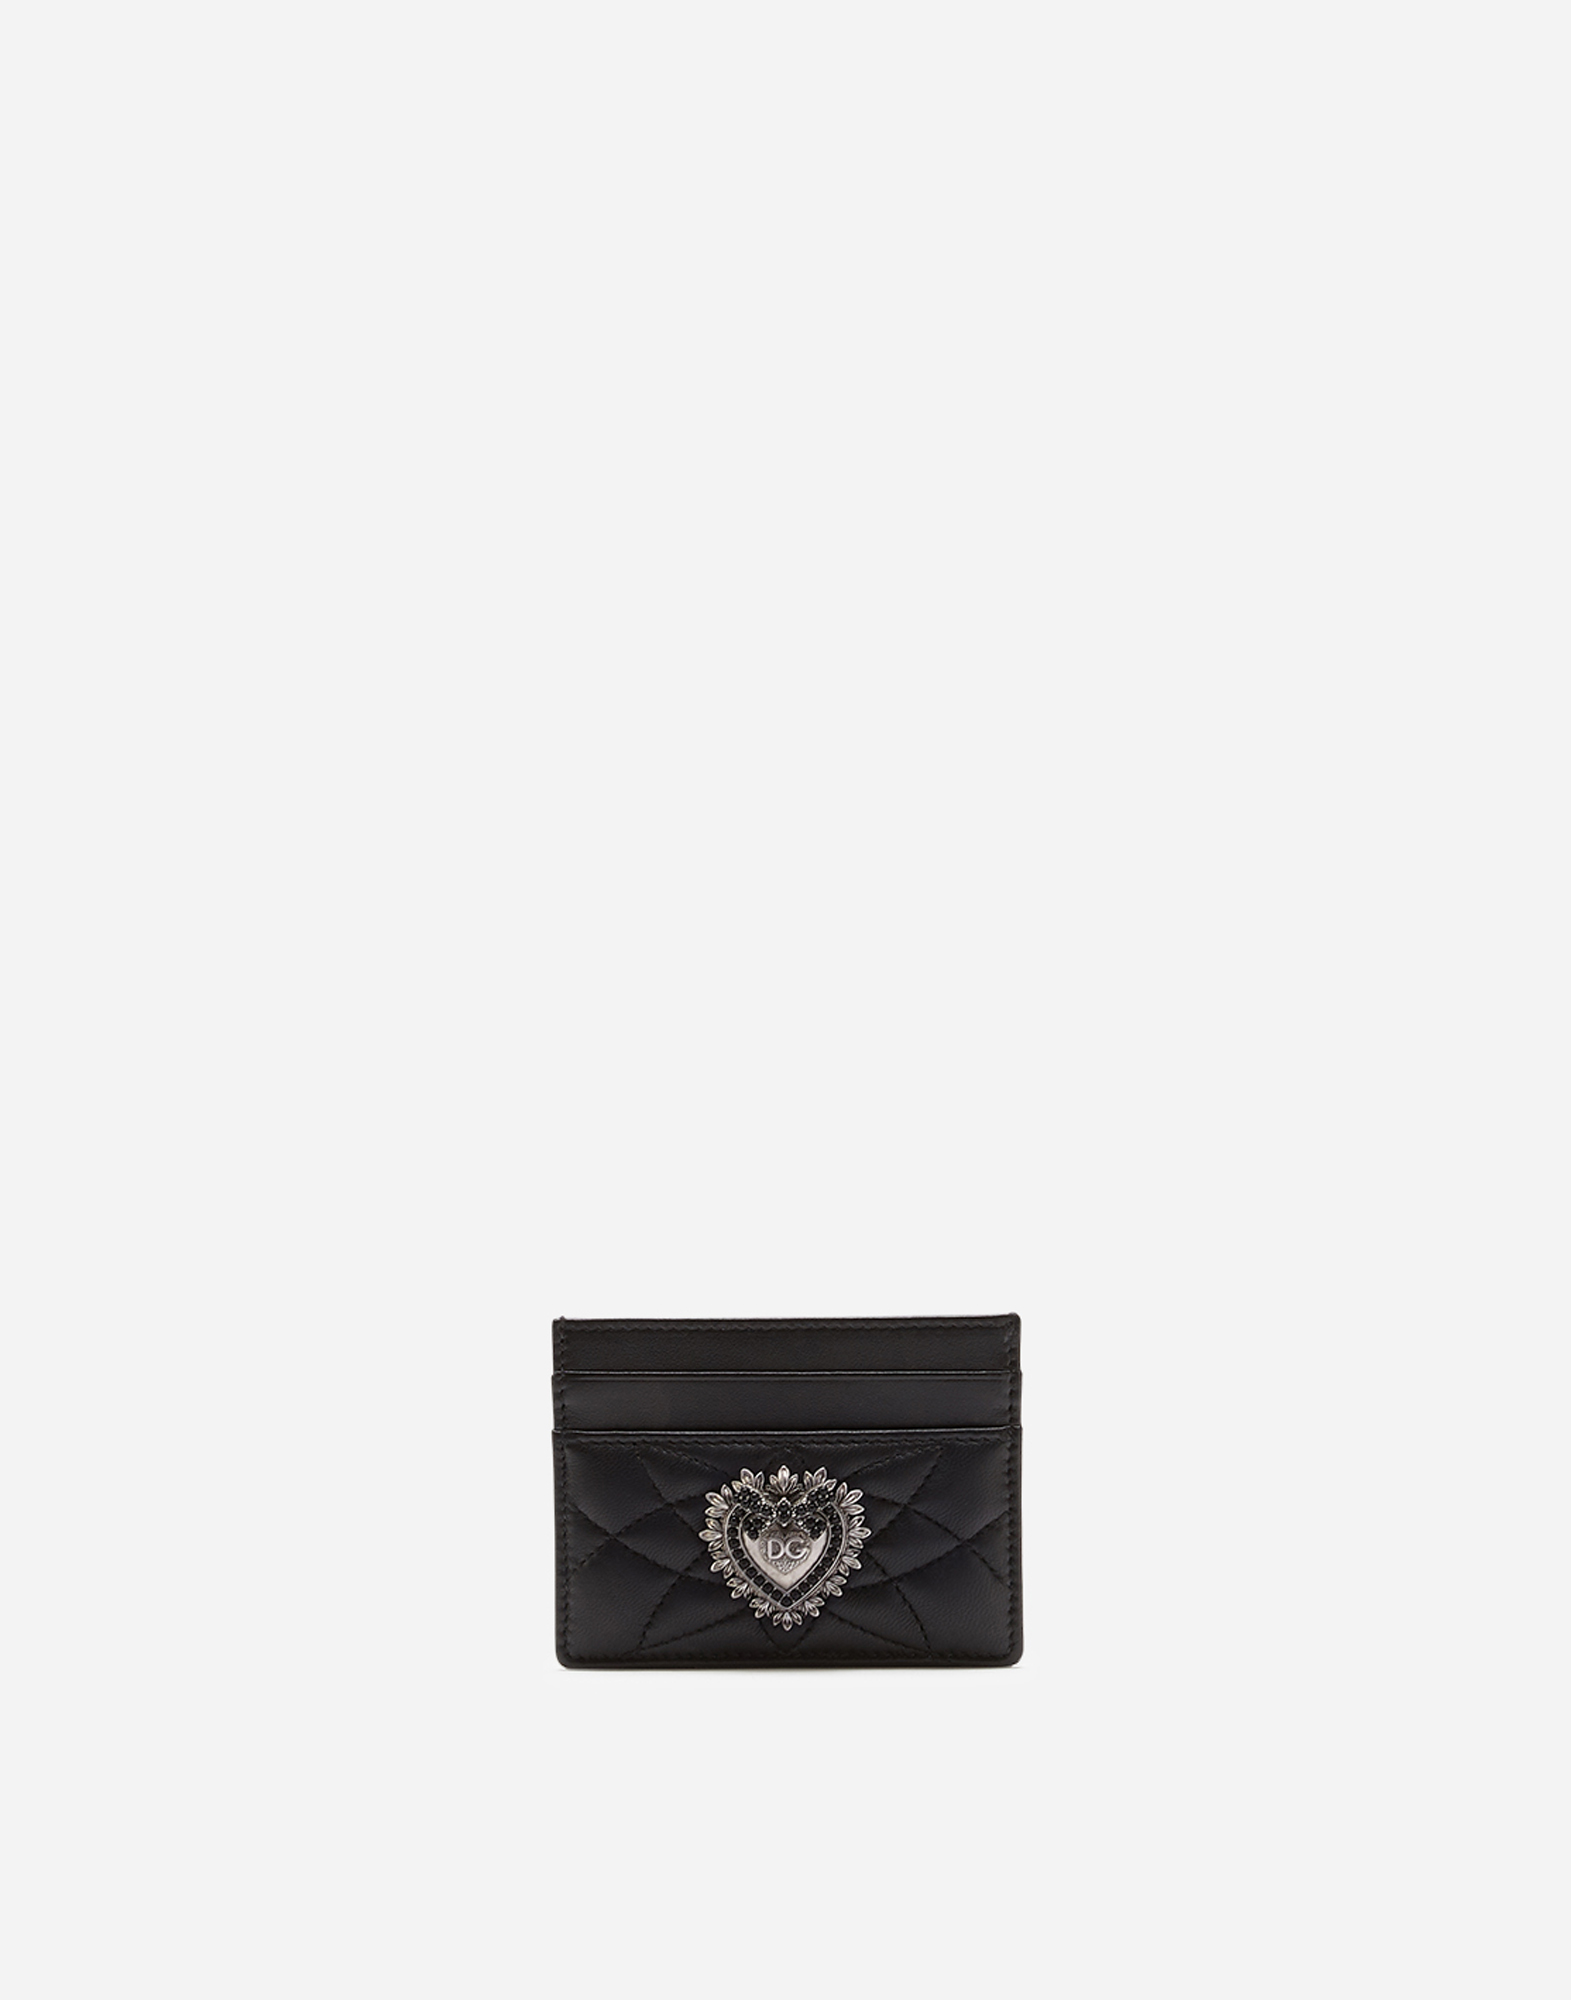 Women's Wallets and Small Leather Goods 